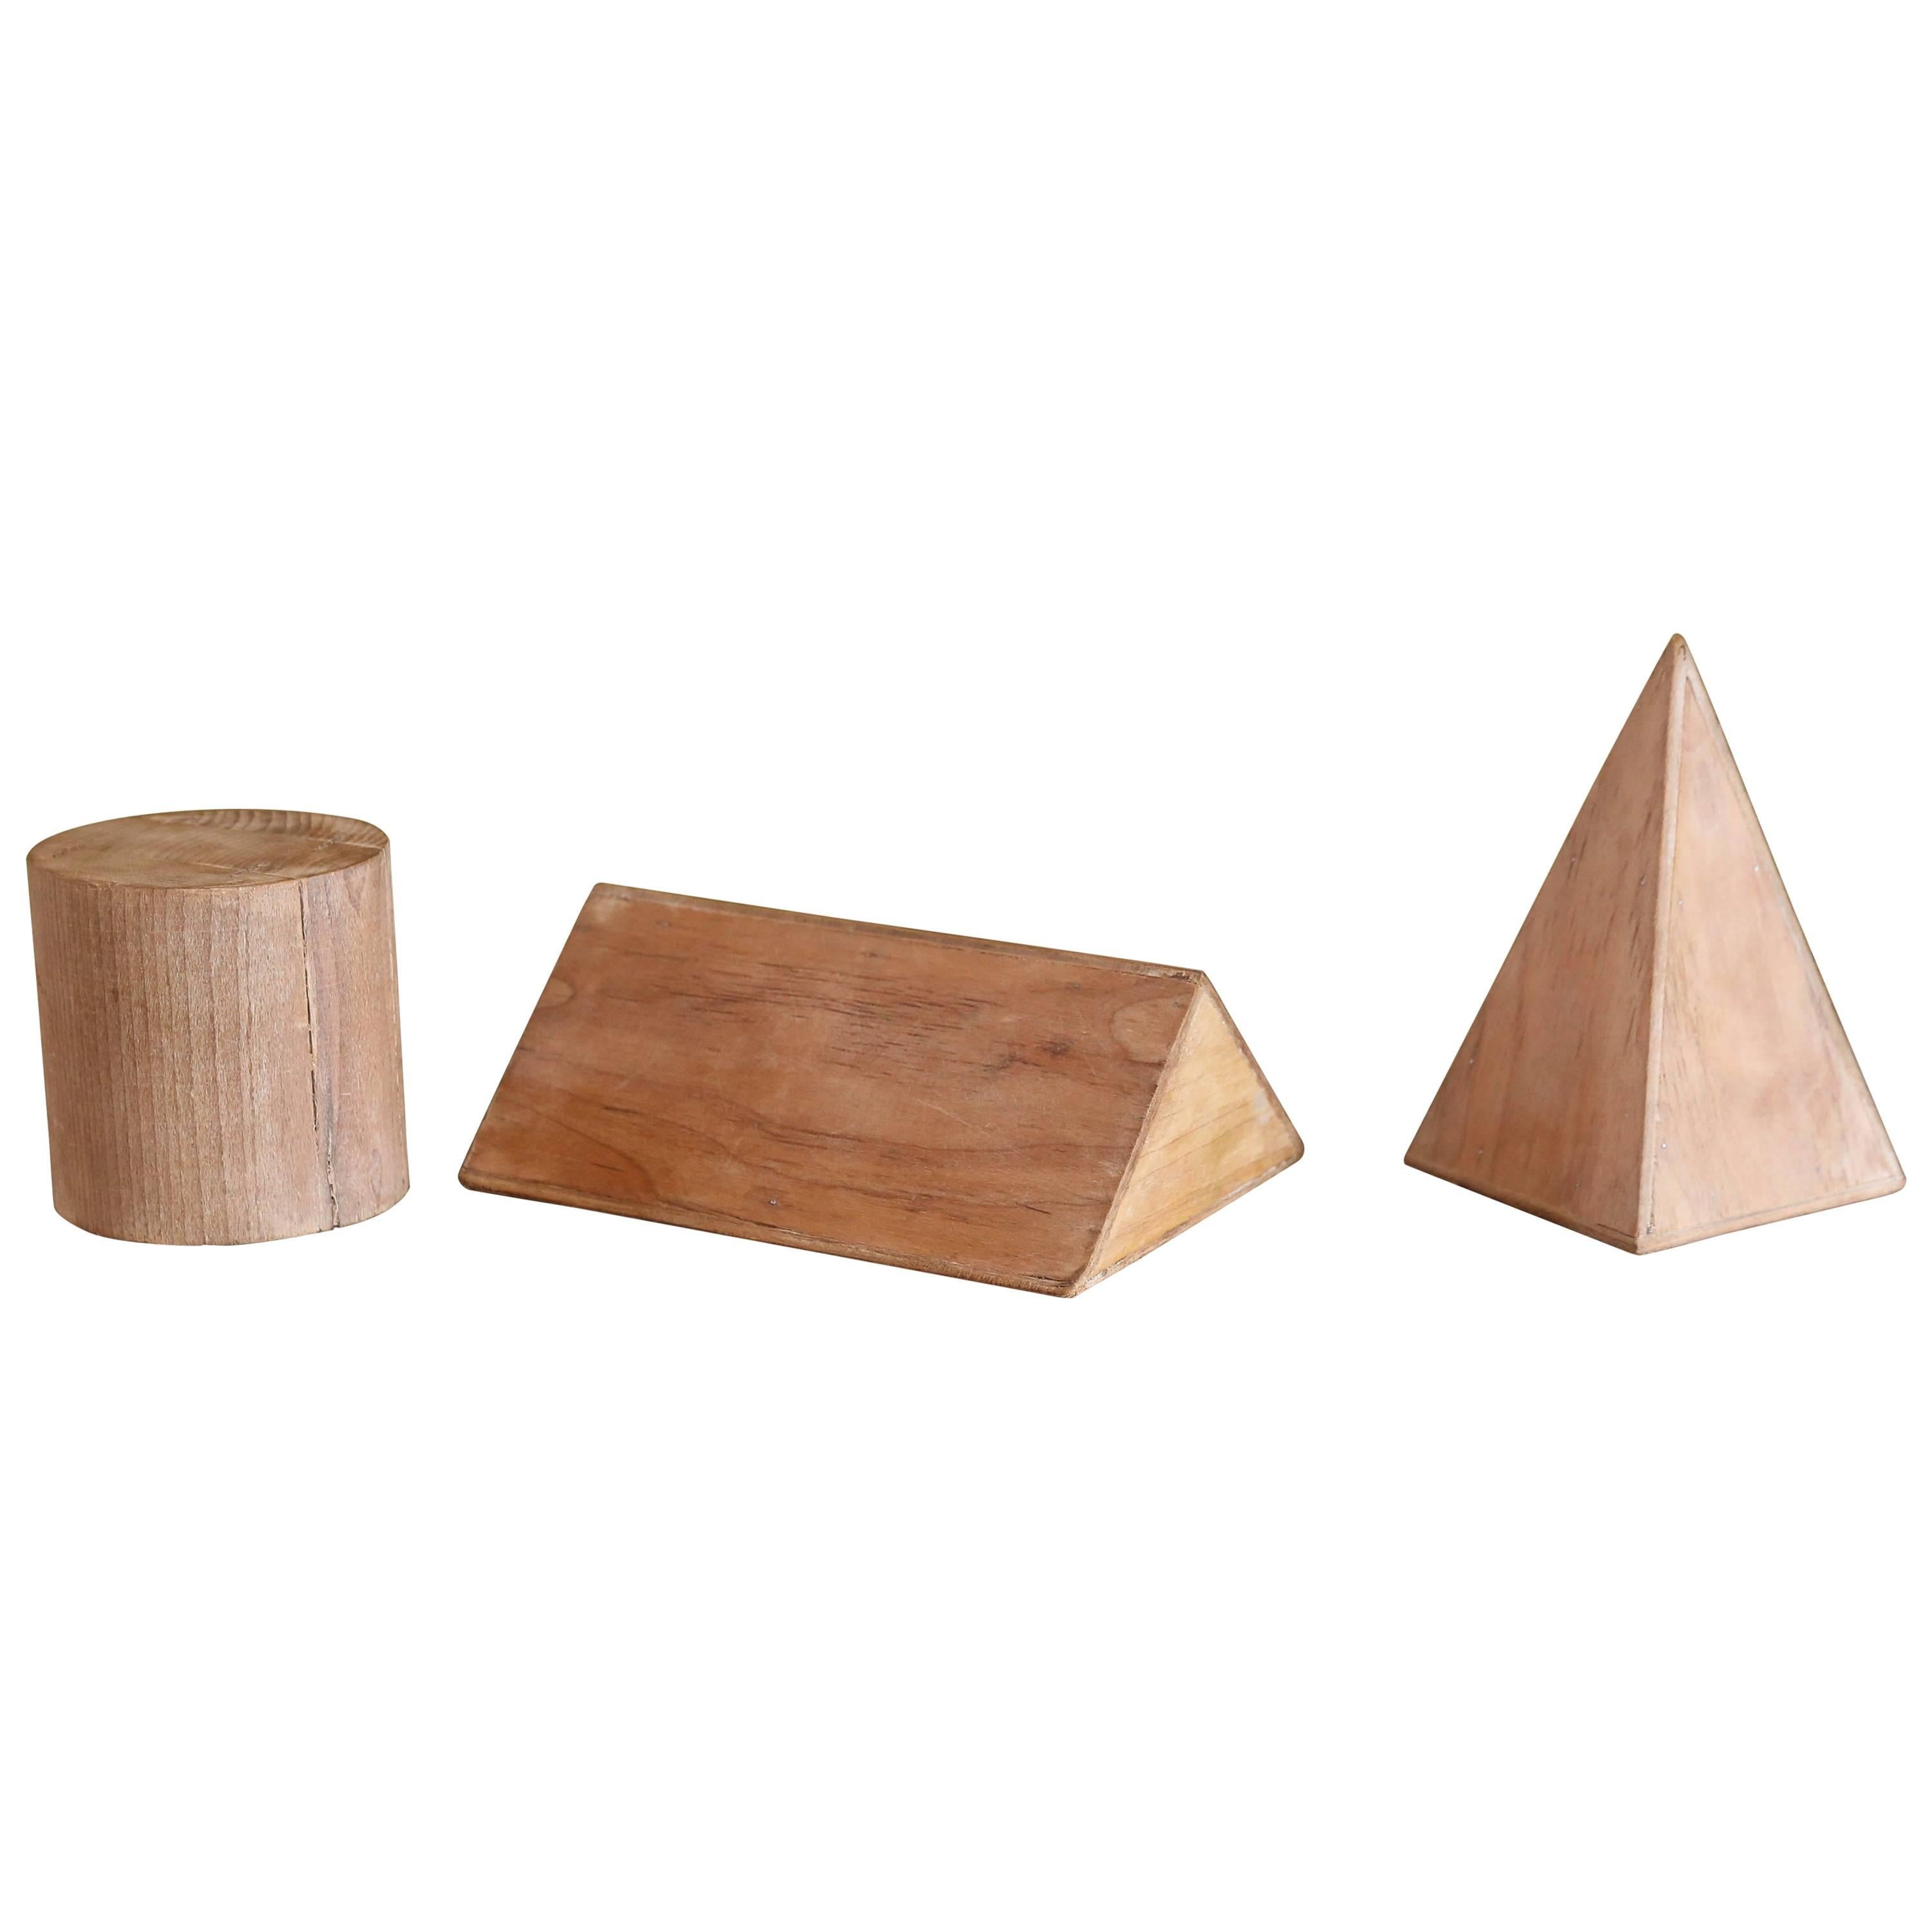 Set of Three Handcrafted Wood Geometric Teaching Forms from Belgium, circa 1920